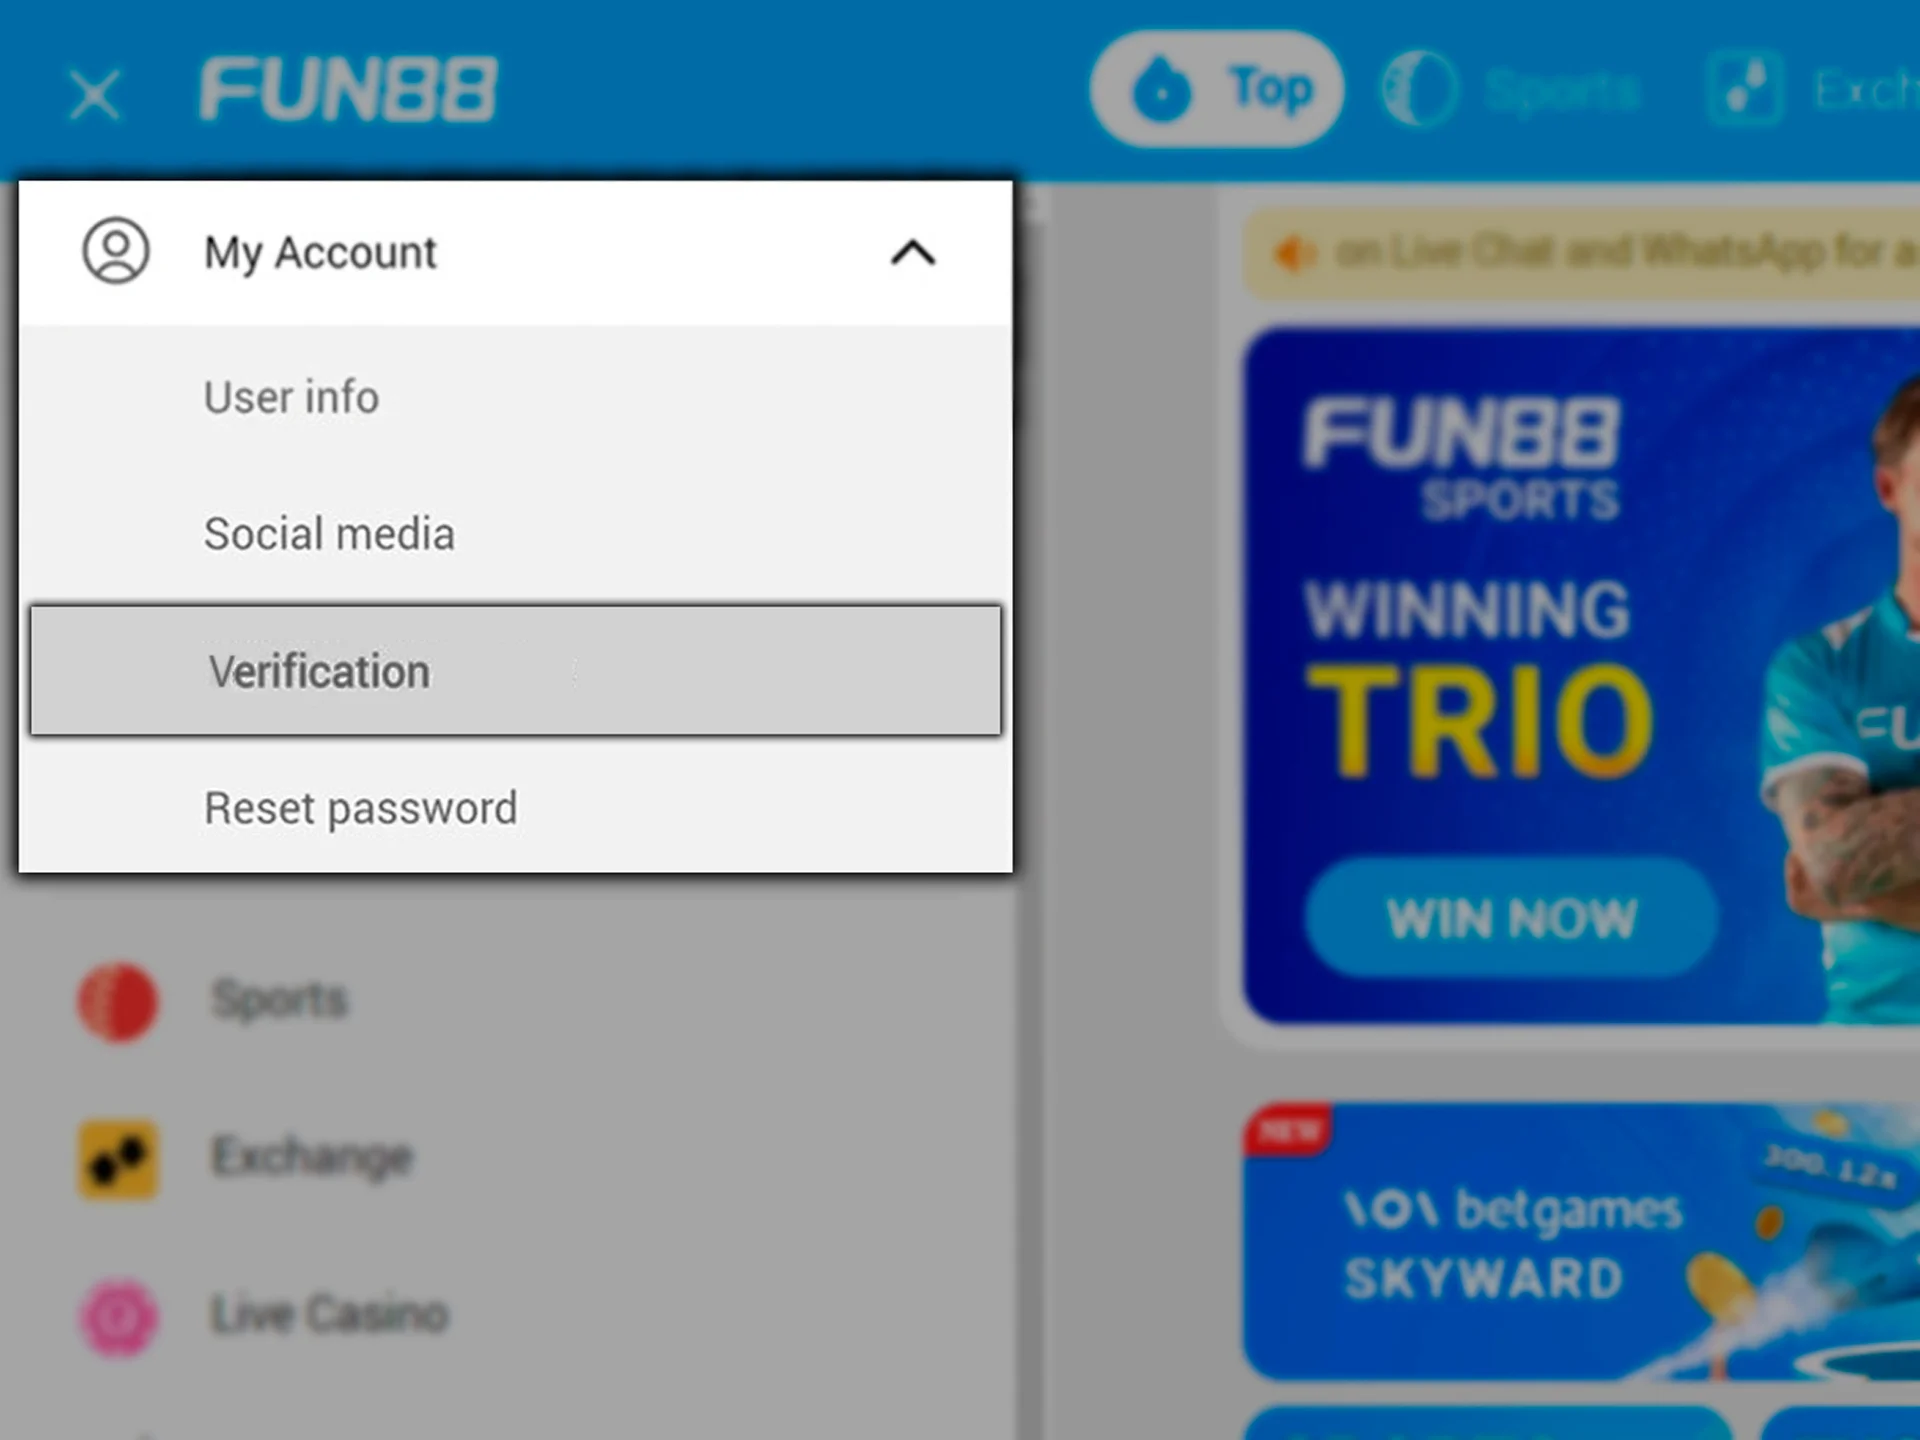 Complete the Fun88 profile verification process before making a deposit and placing bets.